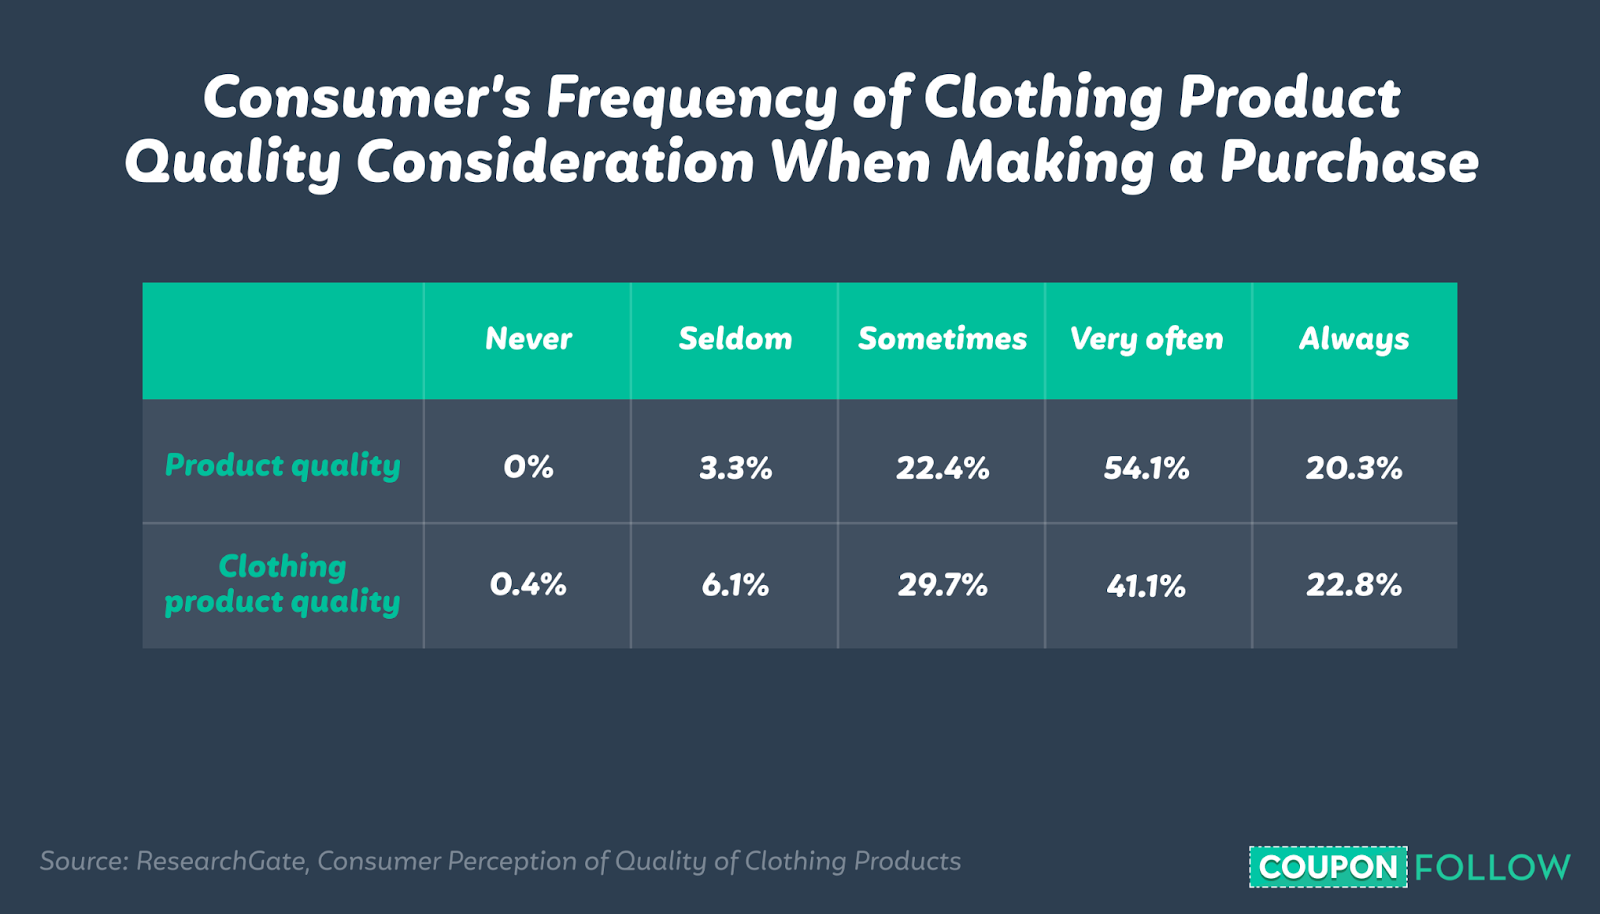 graph showing the percentage of consumers who consider clothing product quality when making a purchase.